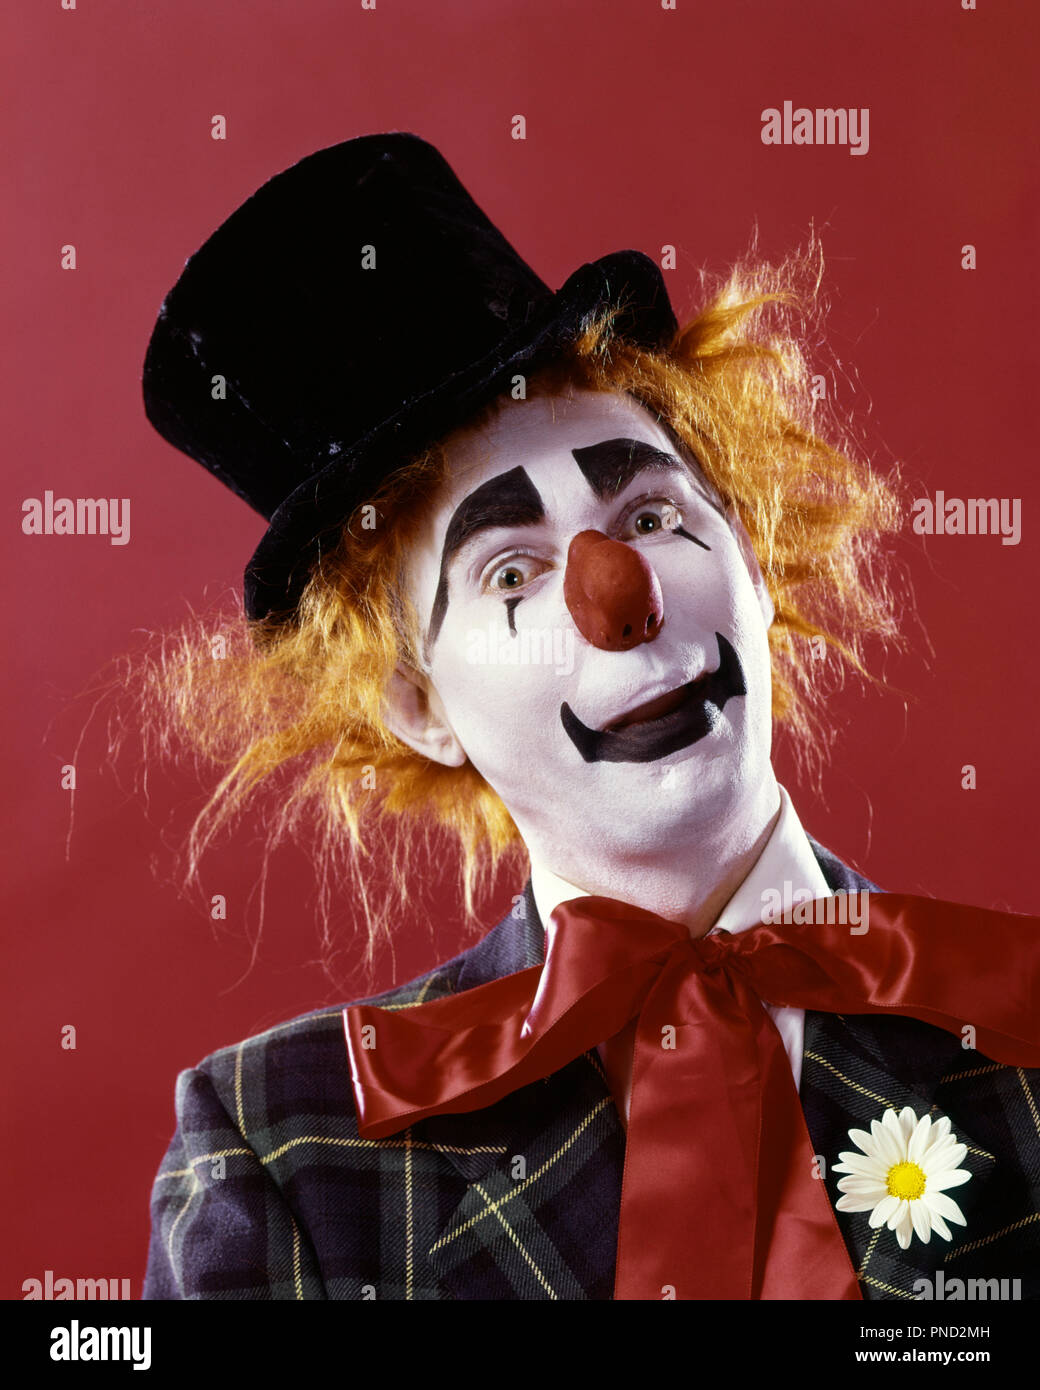 1970s SILLY WHITE FACE RED NOSE CLOWN LOOKING AT CAMERA WEARING TOP HAT ORANGE HAIR WIG PLAID JACKET AND RED RIBBON NECK TIE  - kc5322 PHT001 HARS CONFIDENCE ORANGE EXPRESSIONS EYE CONTACT BIZARRE SUCCESS PERFORMING ARTS HAPPINESS WEIRD PERFORMER AND EXCITEMENT ZANY UNCONVENTIONAL OF ENTERTAINER OCCUPATIONS WHITEFACE COULROPHOBIA ACTORS NECK TIE STYLISH IDIOSYNCRATIC AMUSING ECCENTRIC ENTERTAINERS MID-ADULT MID-ADULT MAN PERFORMERS TOP HAT YOUNG ADULT MAN CAUCASIAN ETHNICITY ERRATIC OLD FASHIONED RED NOSE Stock Photo